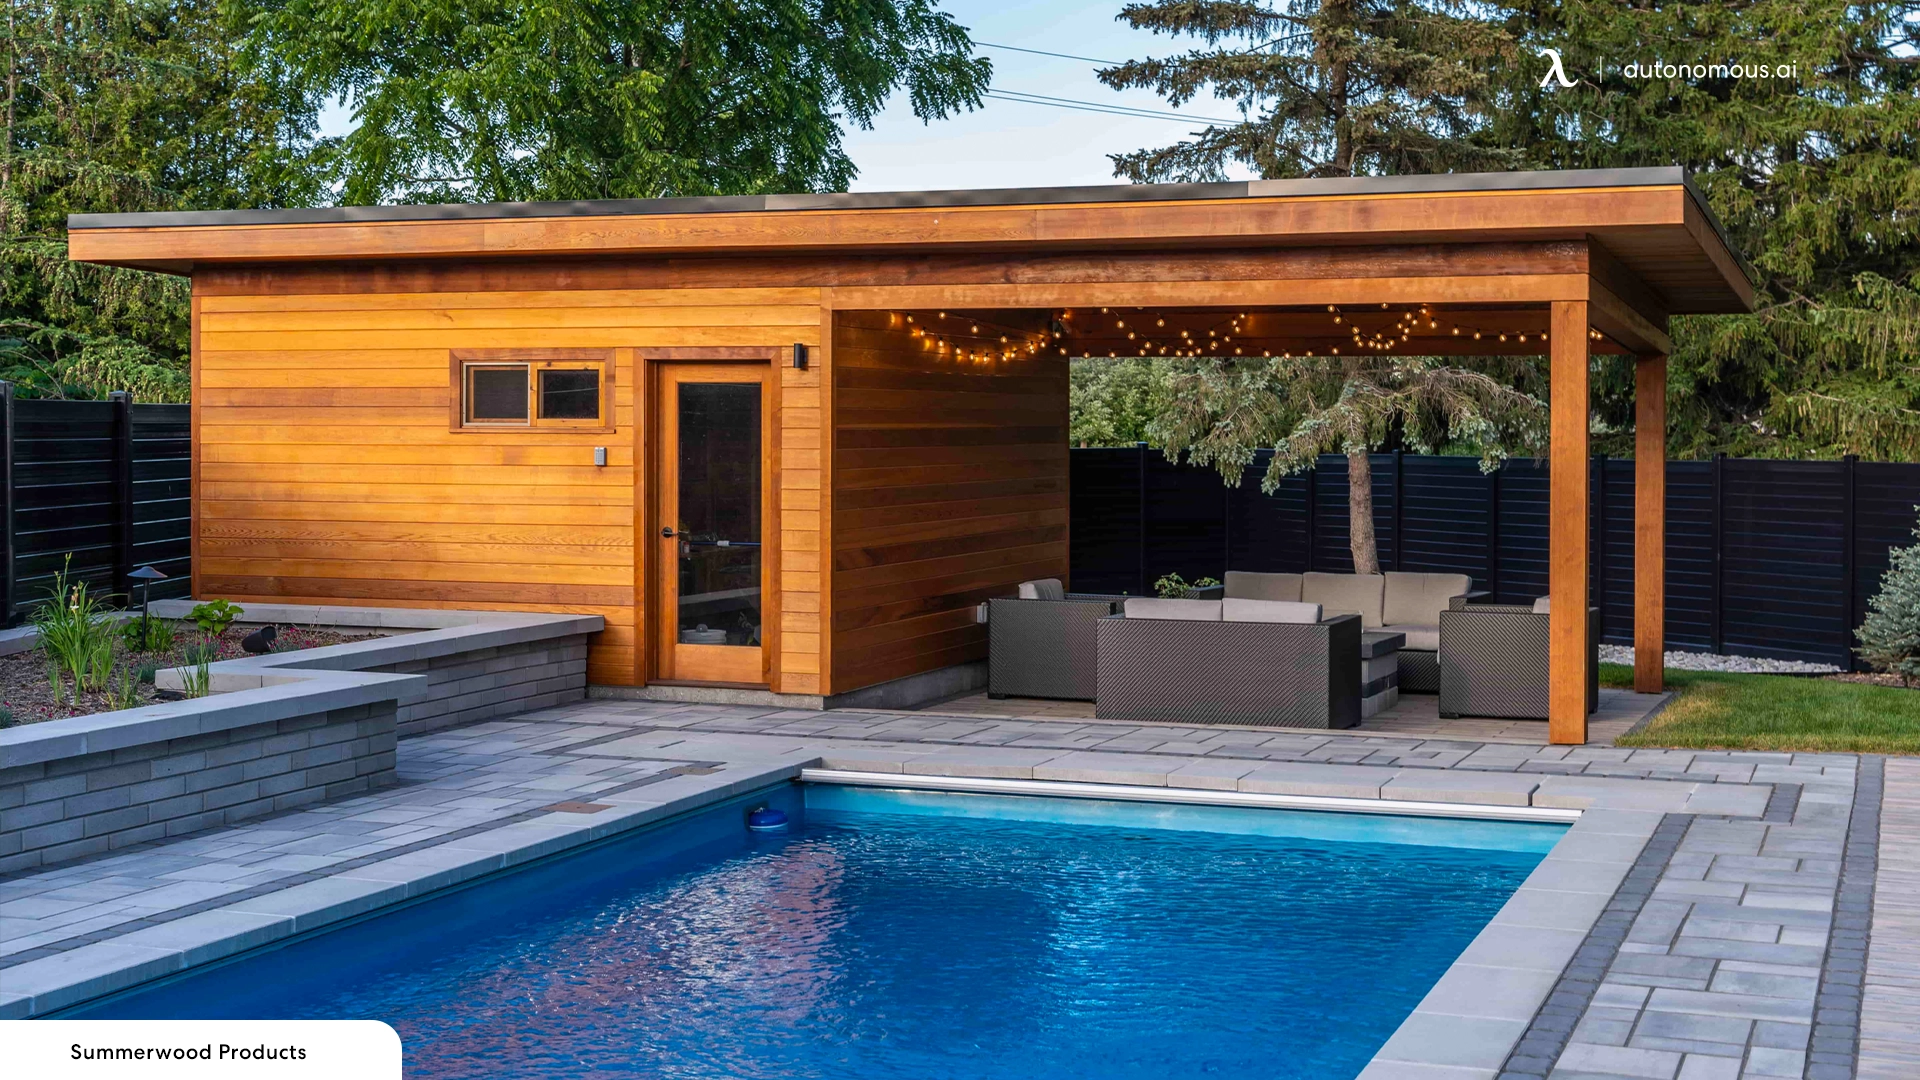 Tips and Guidelines for Maintaining and Caring for a Modular Pool House